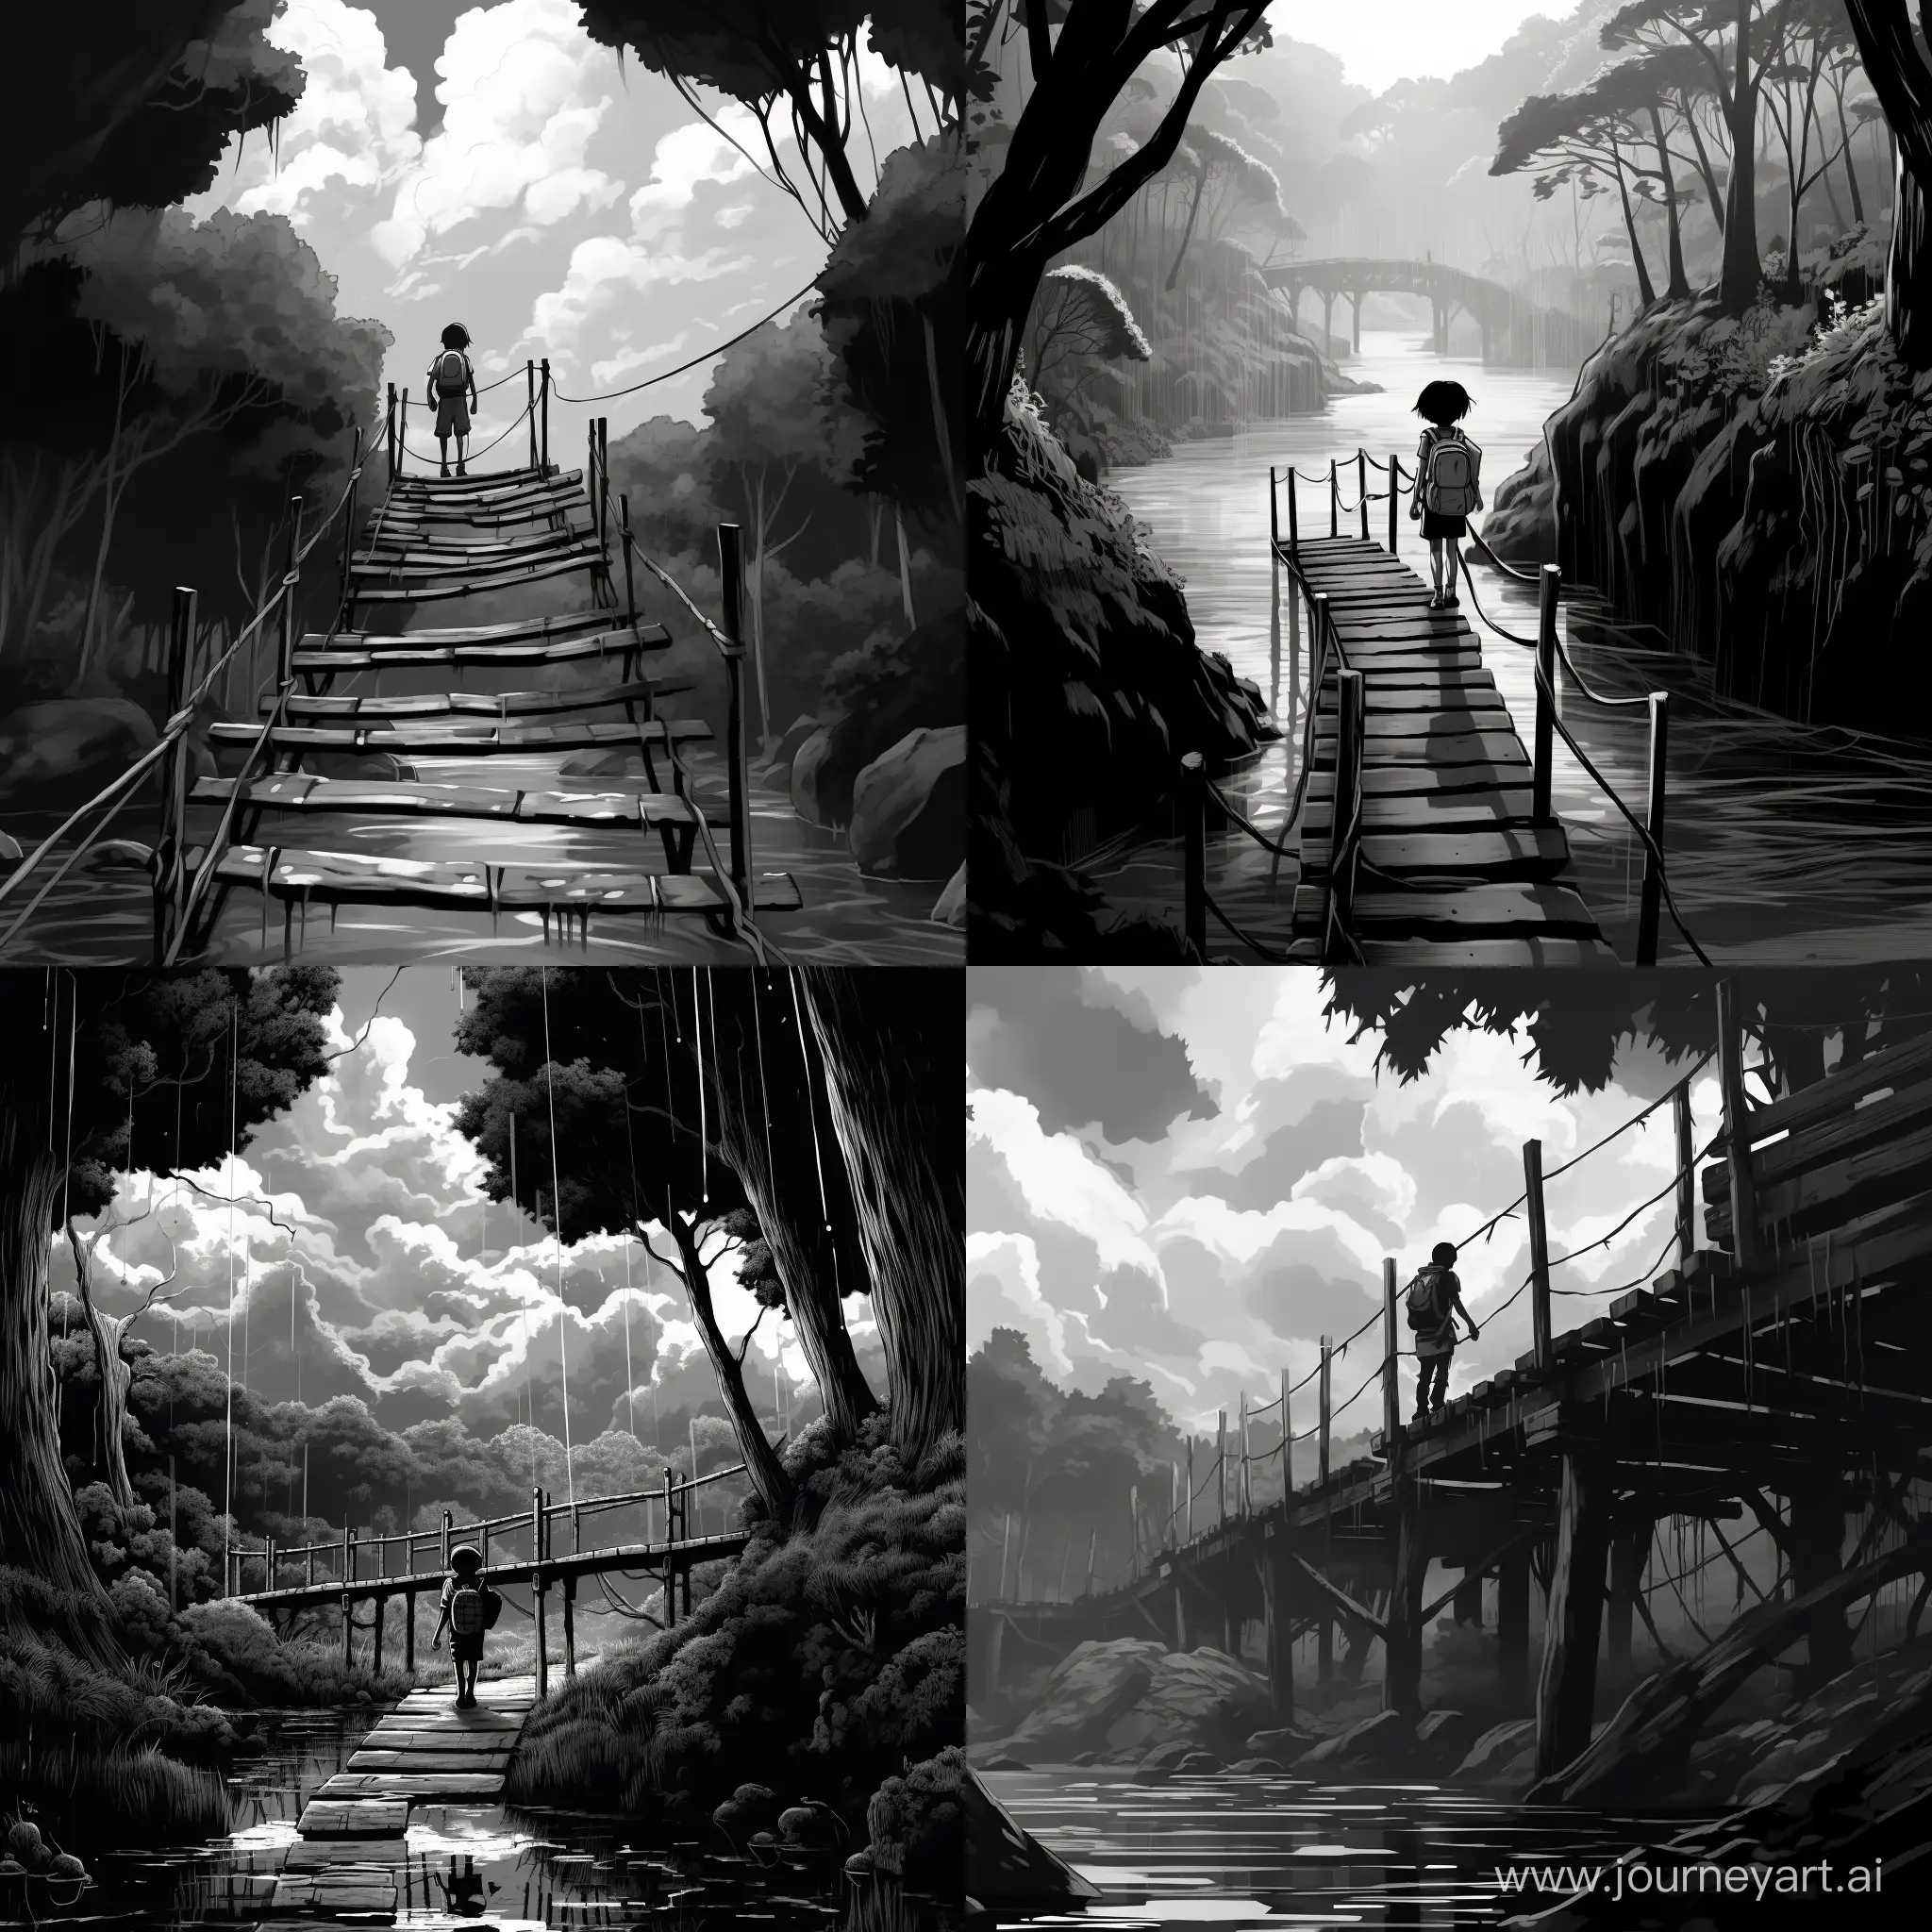 Eren Yeger was walking across a narrow bridge over a fast stream in manga style black and white